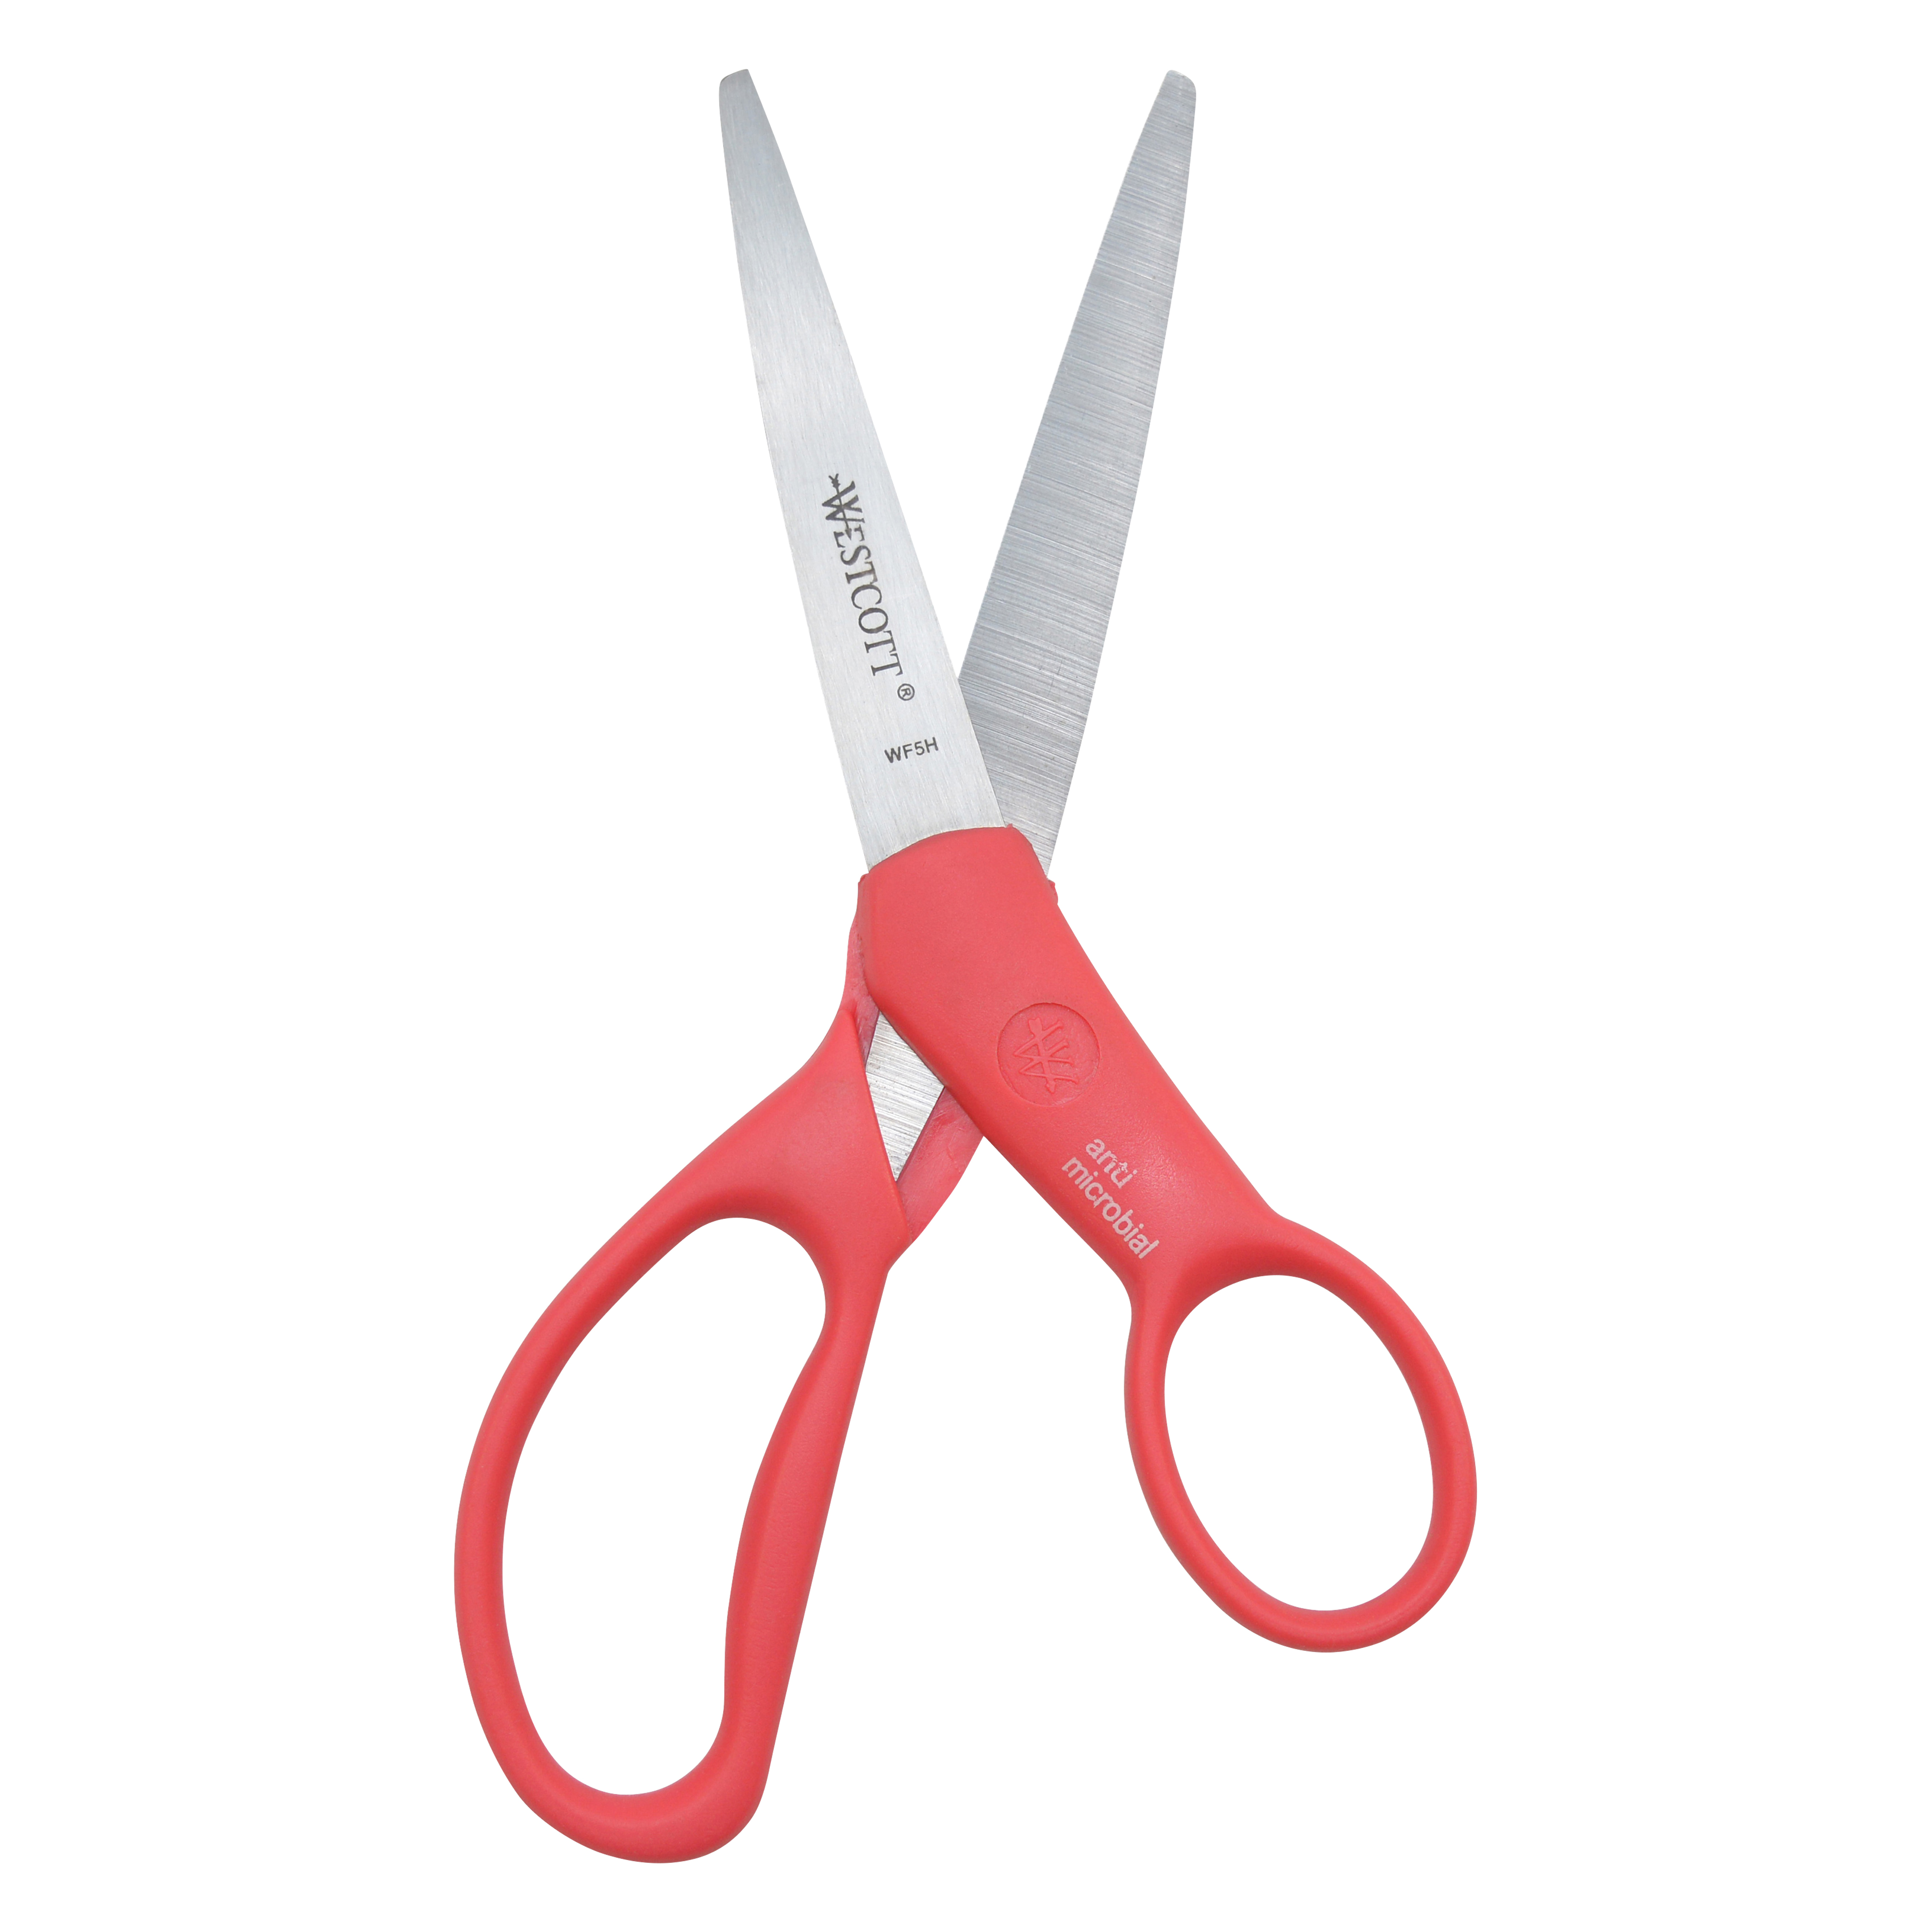 Westcott 7" Student Scissors with Anti-Microbial Protection, Multi-Color, 1 Count - image 3 of 8